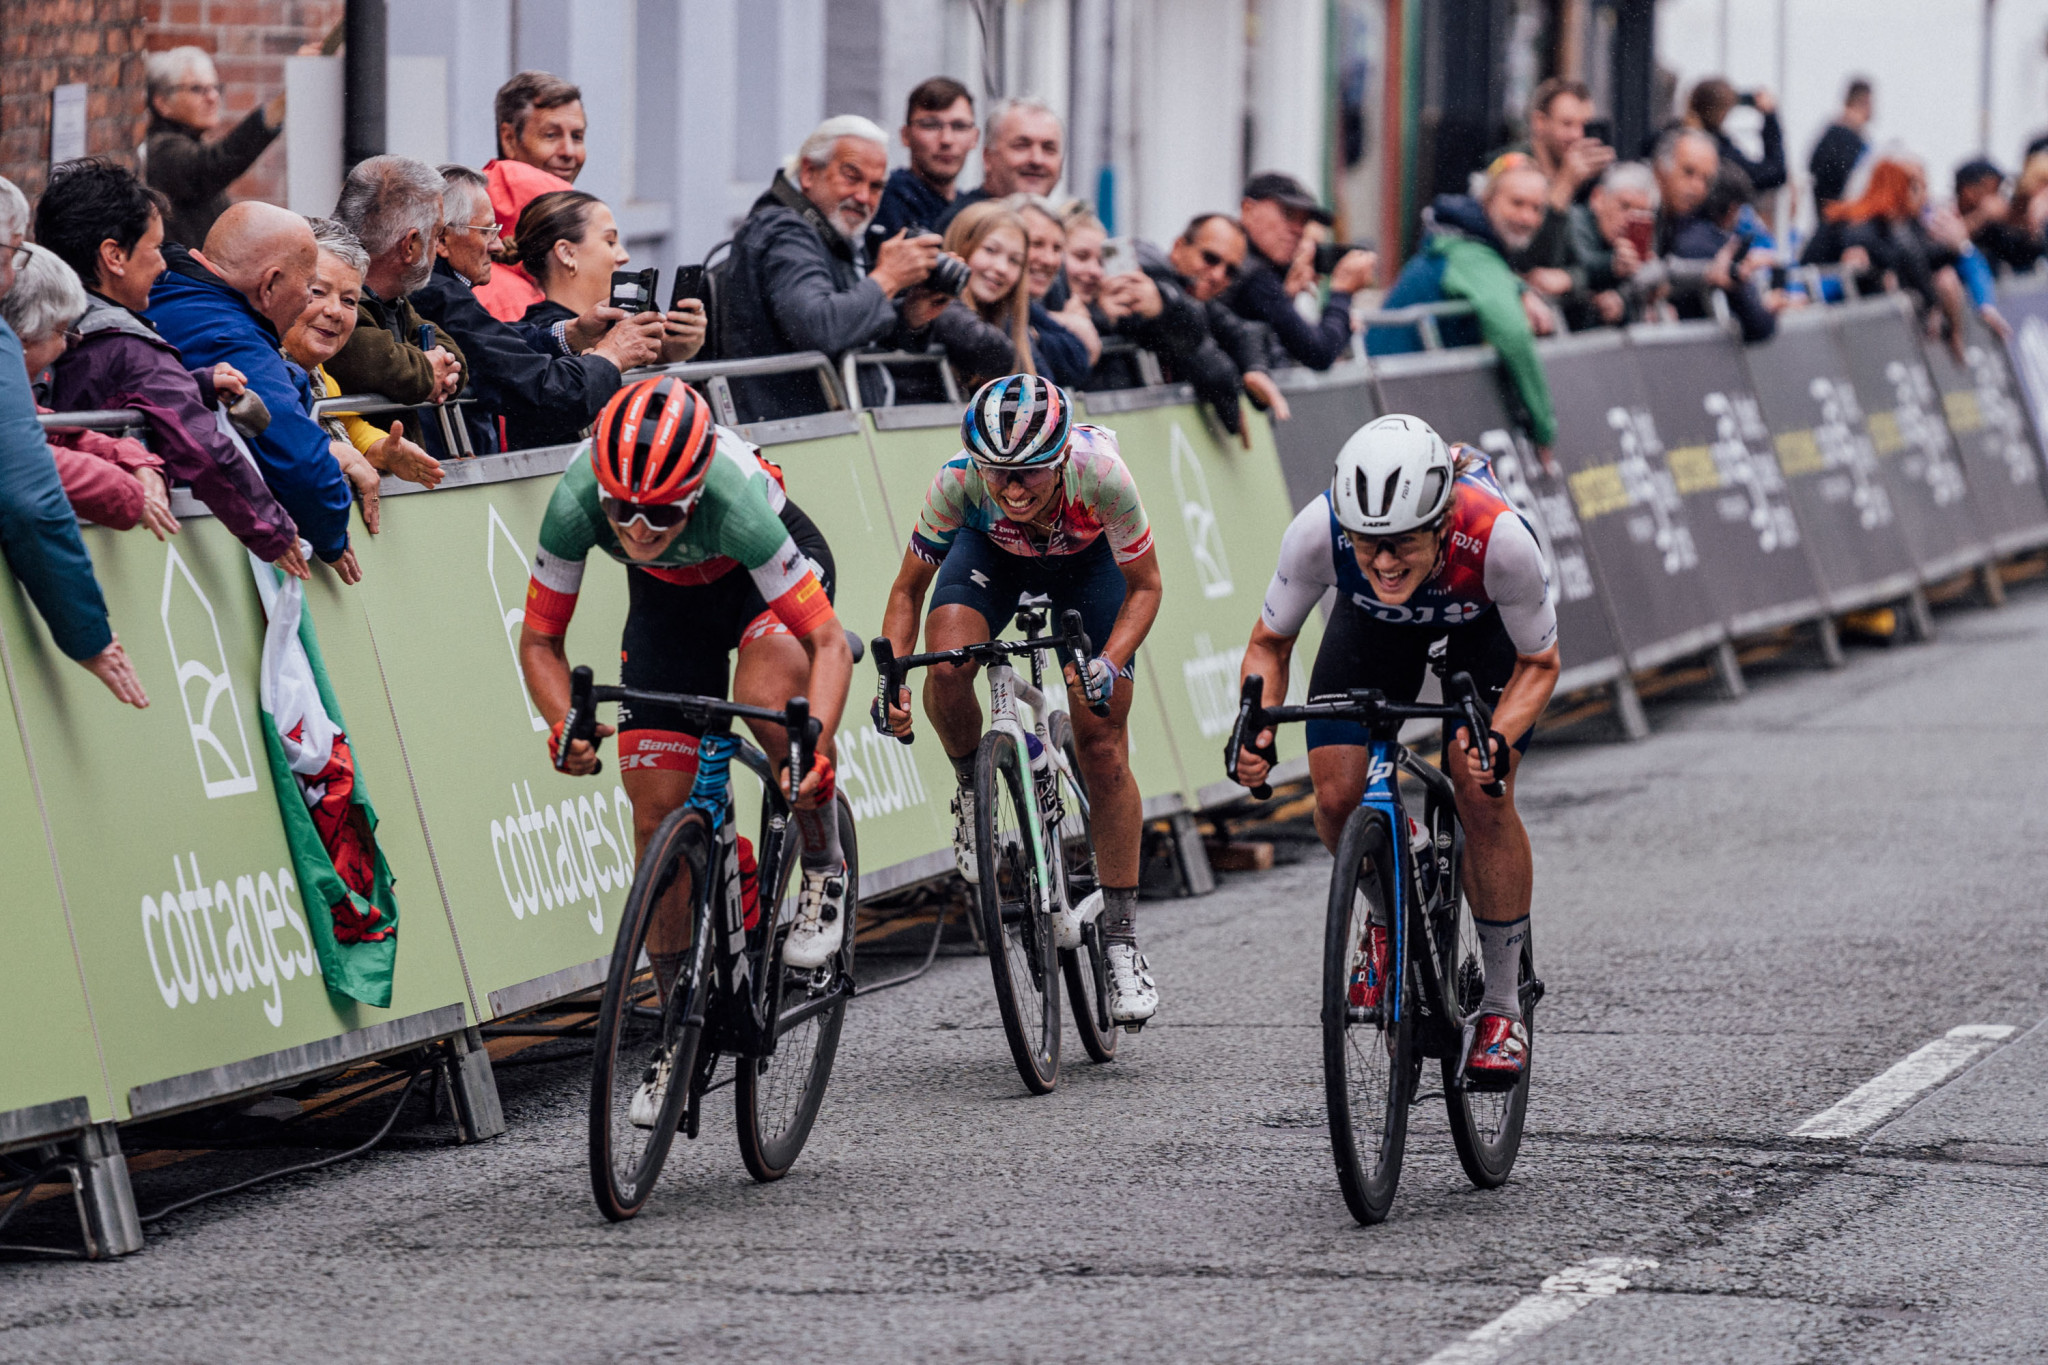 The Women's Tour cycling race in UK cancelled for 2023 after funding crisis